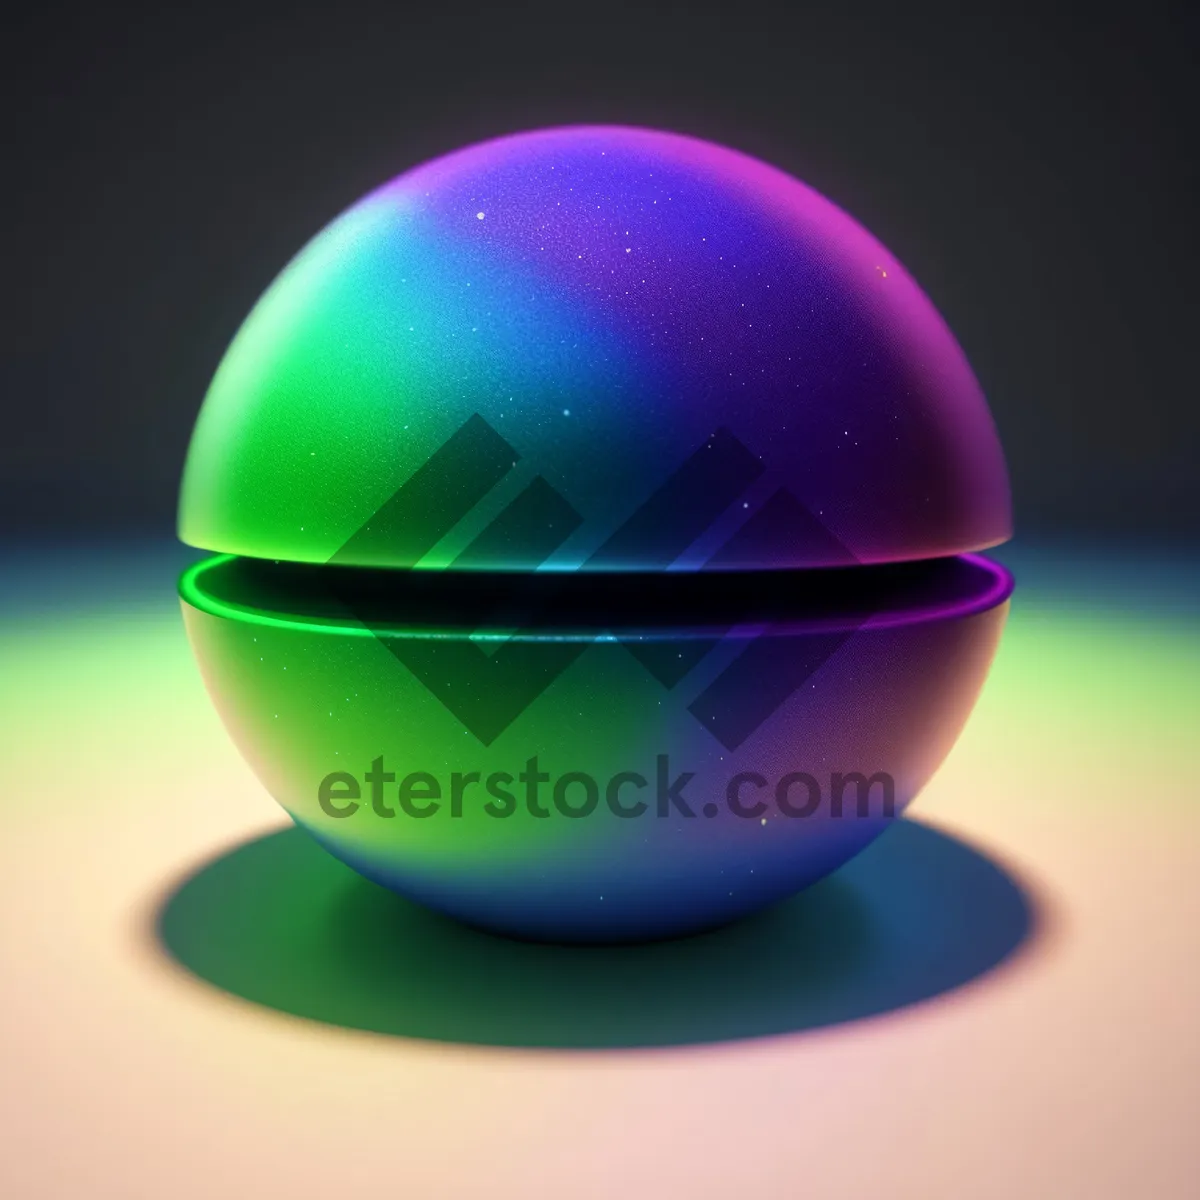 Picture of Globe-shaped glass egg with relief texture